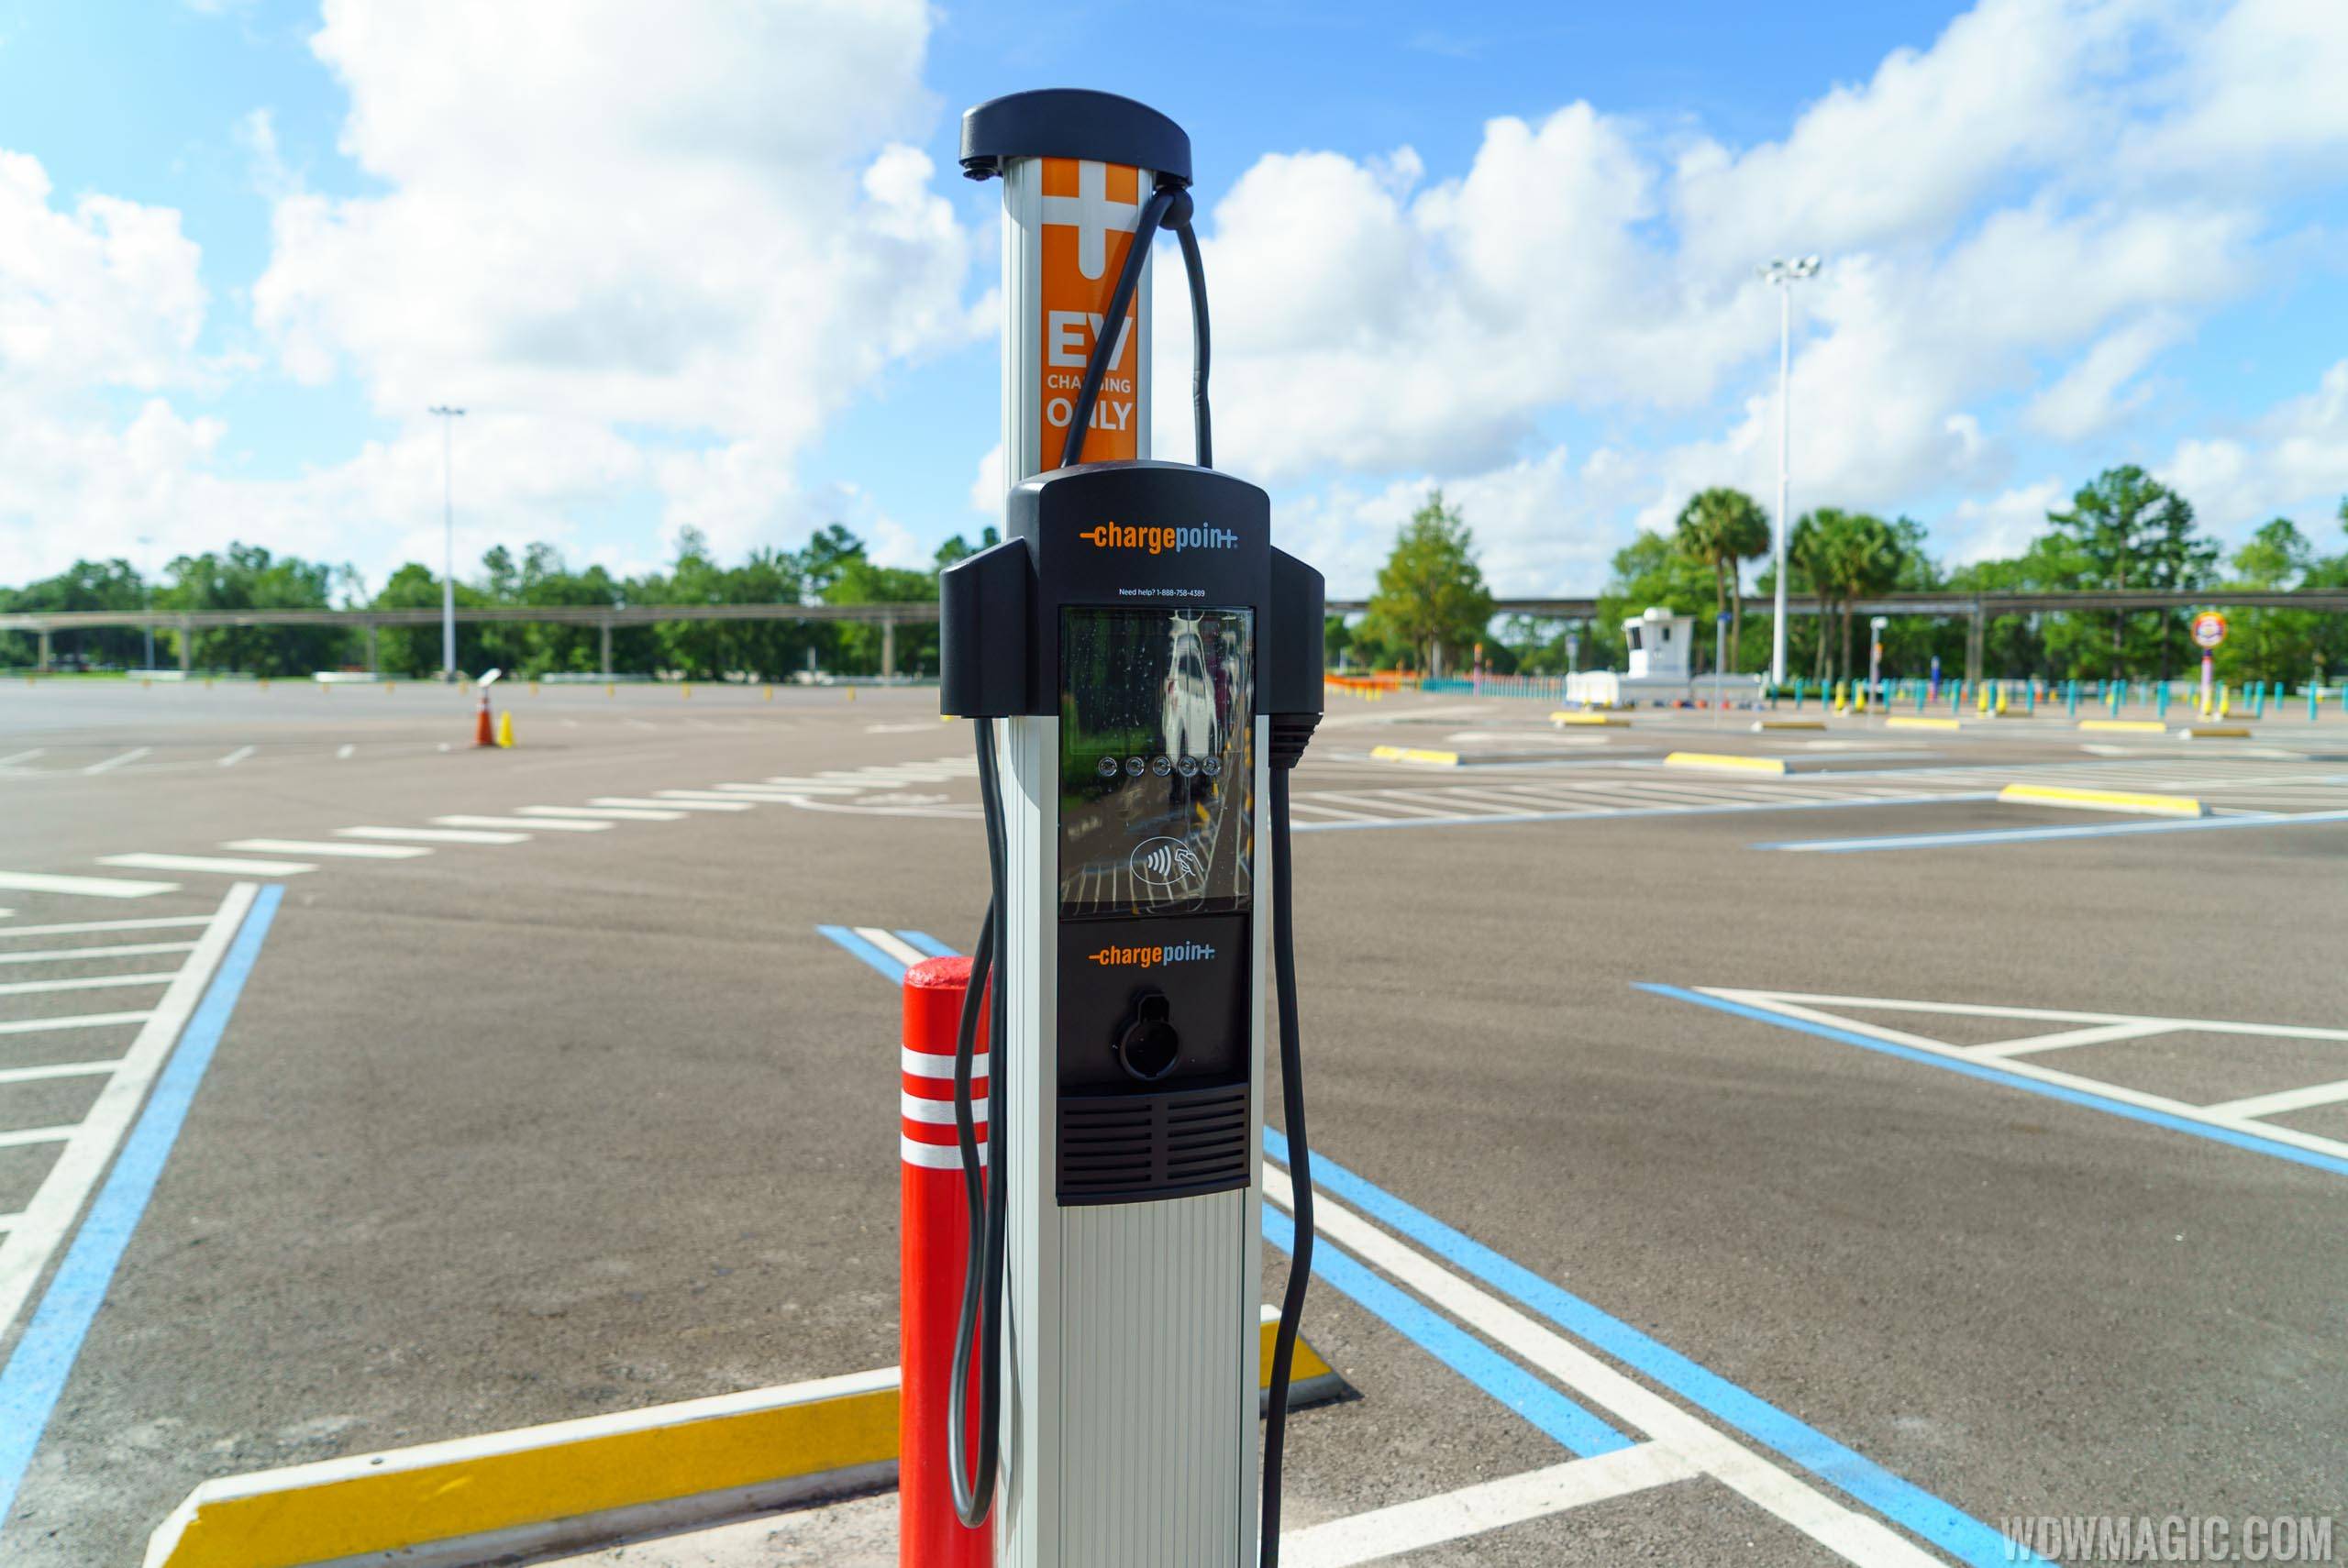 PHOTOS - Electric vehicle charging stations coming to the Magic Kingdom TTC parking lot